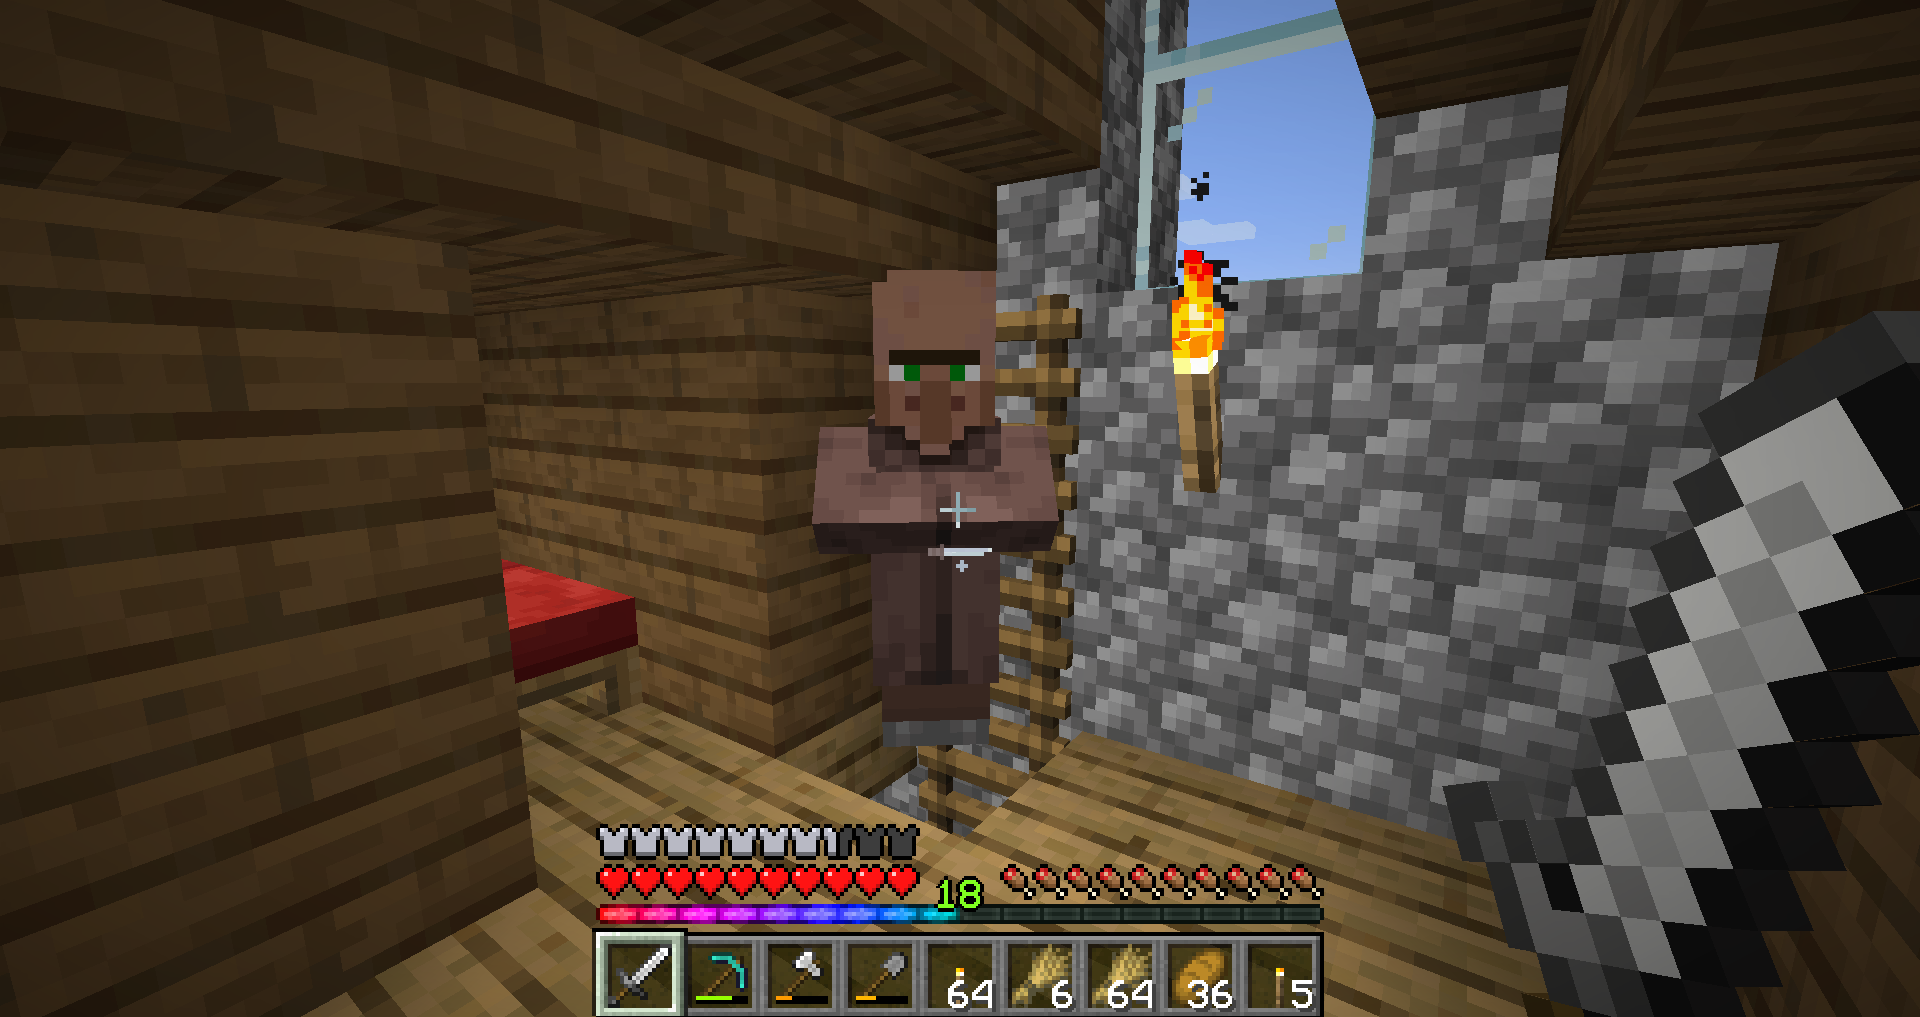 Villager climbed a ladder to get to my bed at night super ...